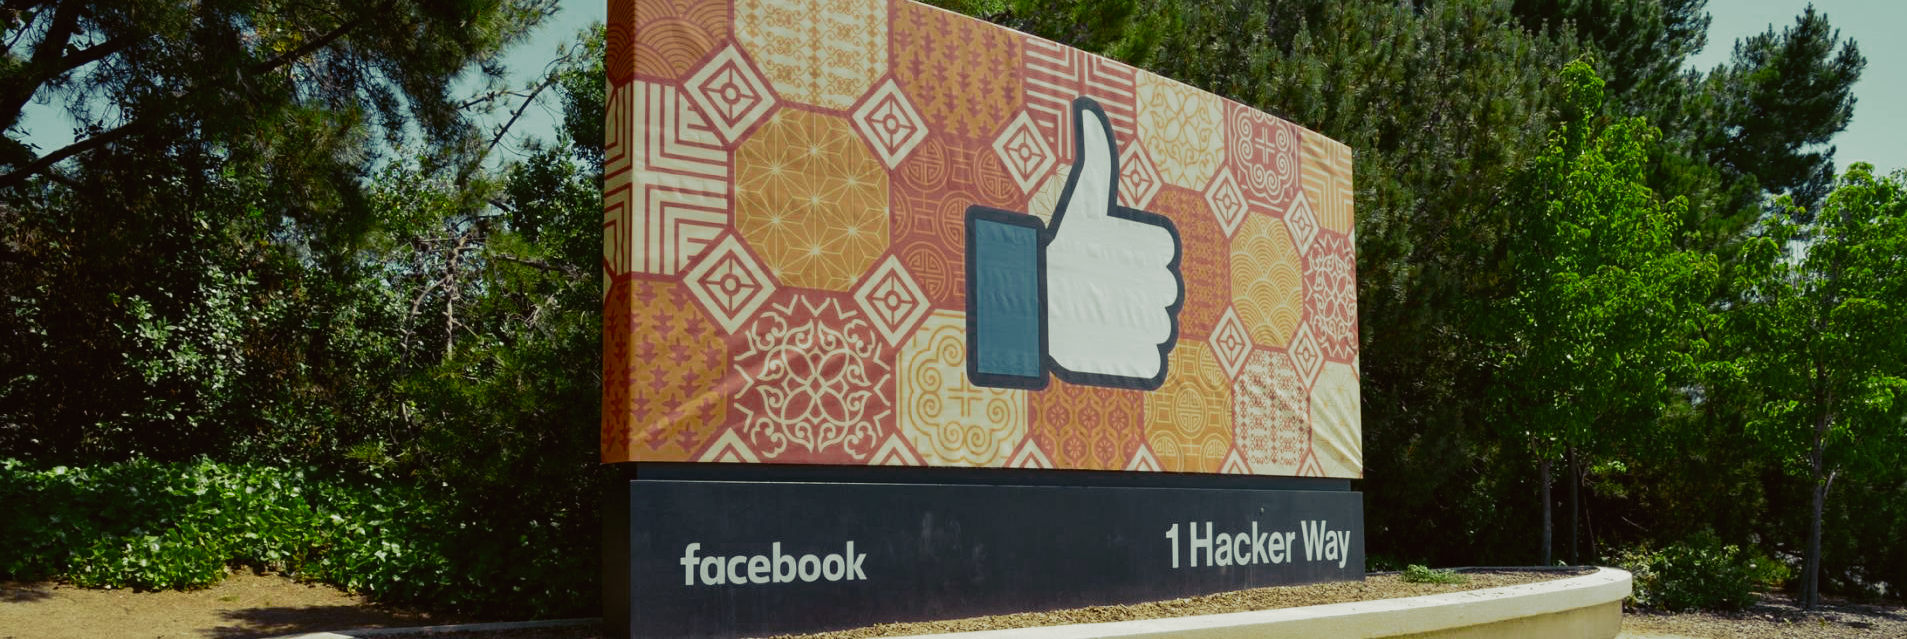 Image of facebook “Thumbs Up” on a billboard